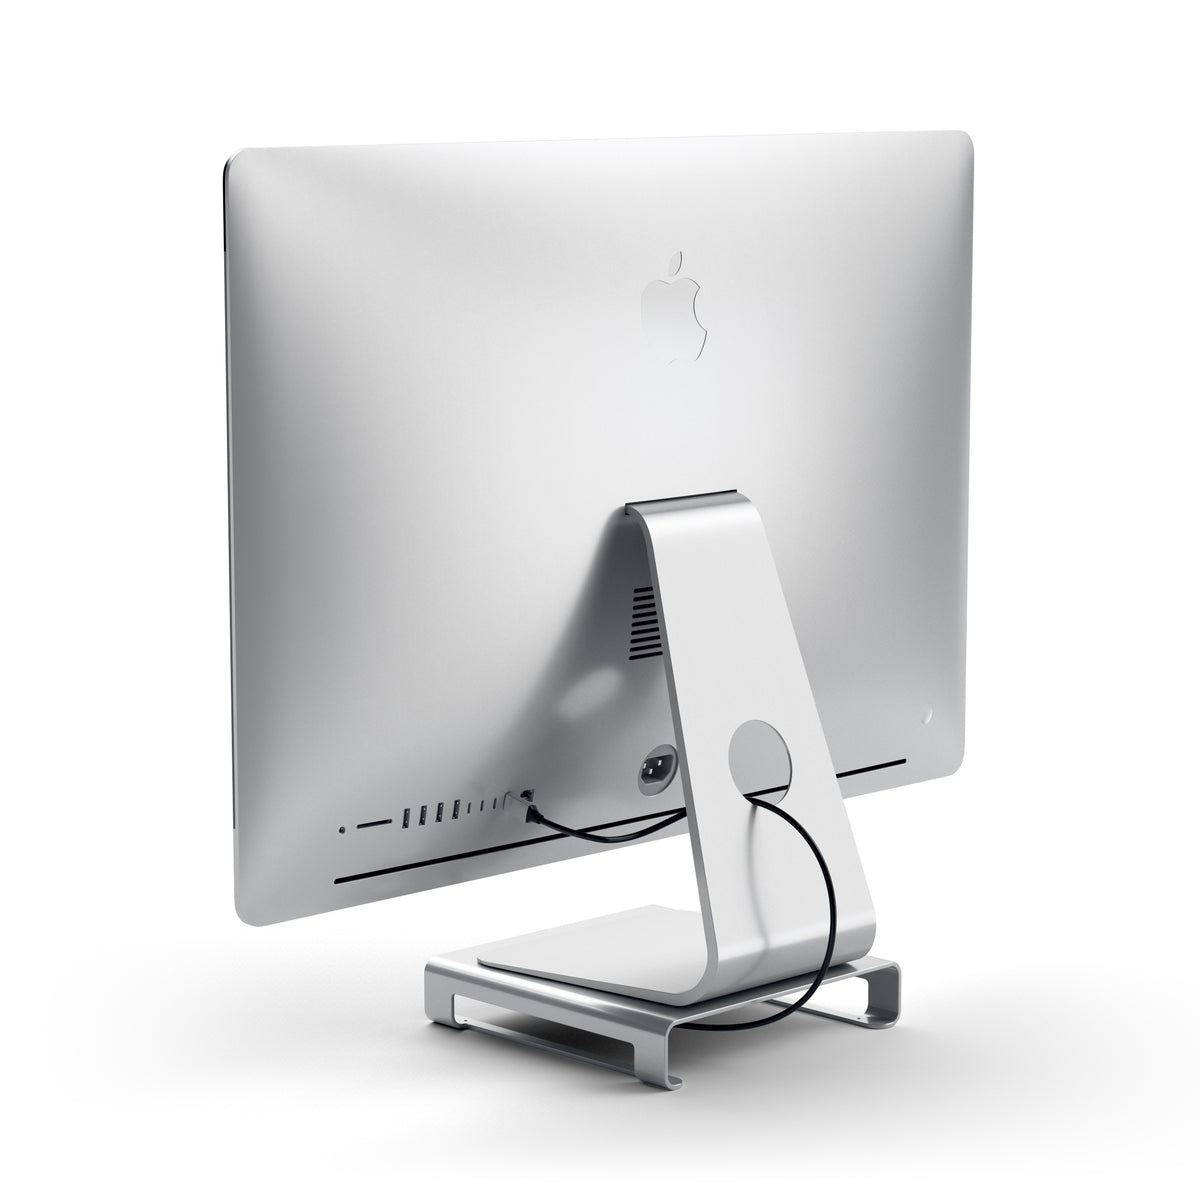 SATECHI Type-C Aluminum Monitor Stand Hub with USB-C Data, USB 3.0, Micro/SD Card Slots &amp; 3.5mm Audio Jack for iMac - Silver